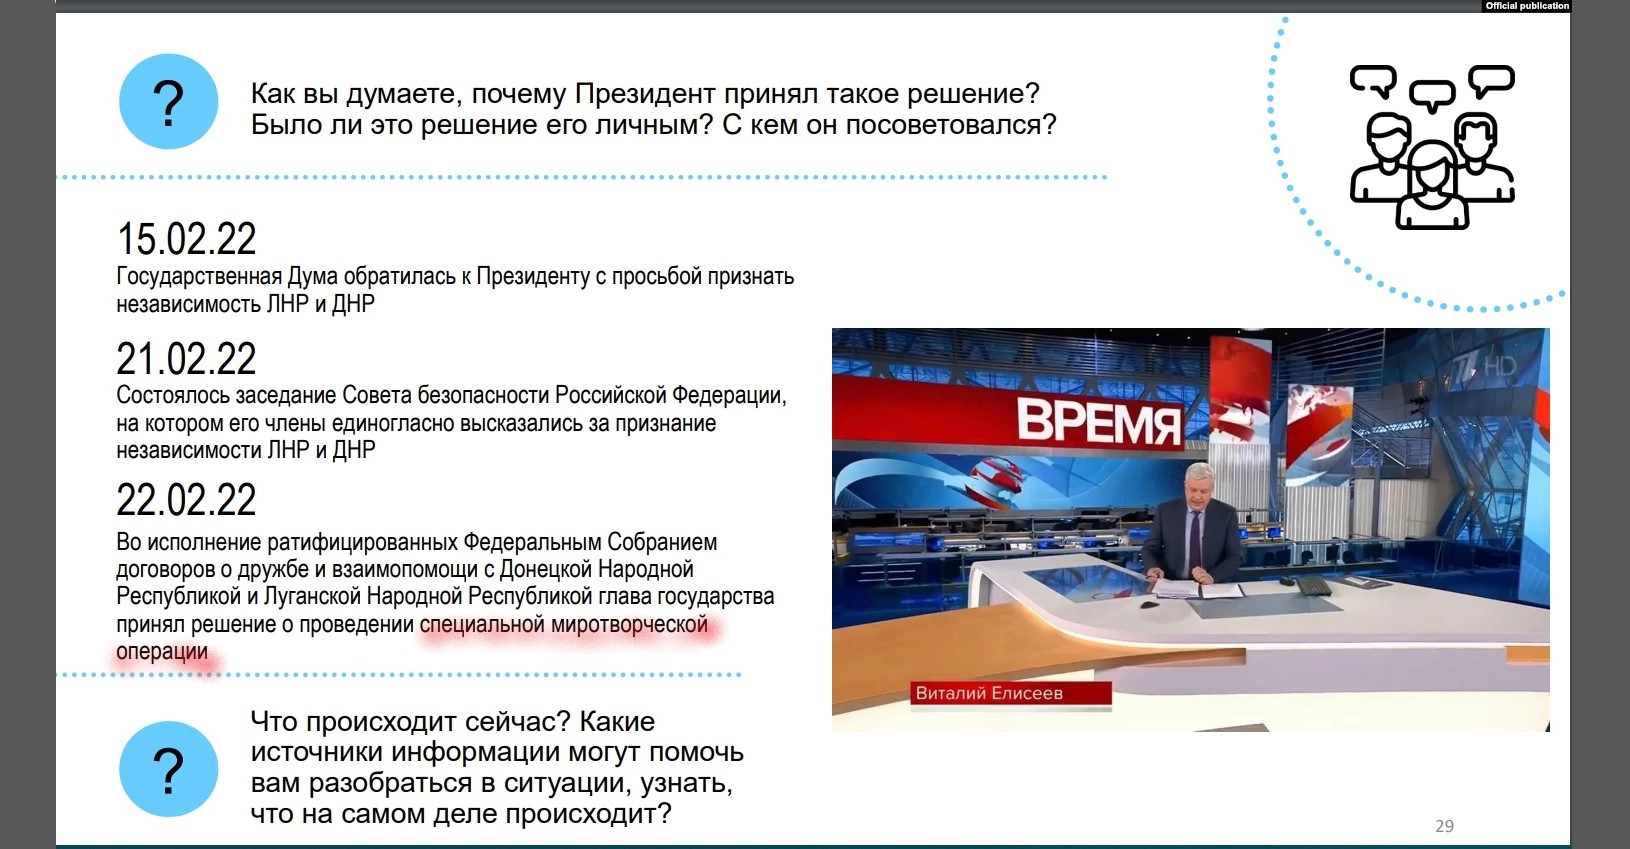 One of the propaganda slides Moscow uses in Russian schools to instill hate for Ukraine and Ukrainians. This slide is supposed to convince pupils that the decision to invade Ukraine was not Putin's personal decision and that the military aggression is a "special peacemaking operation." (Credit: Russian official publication)